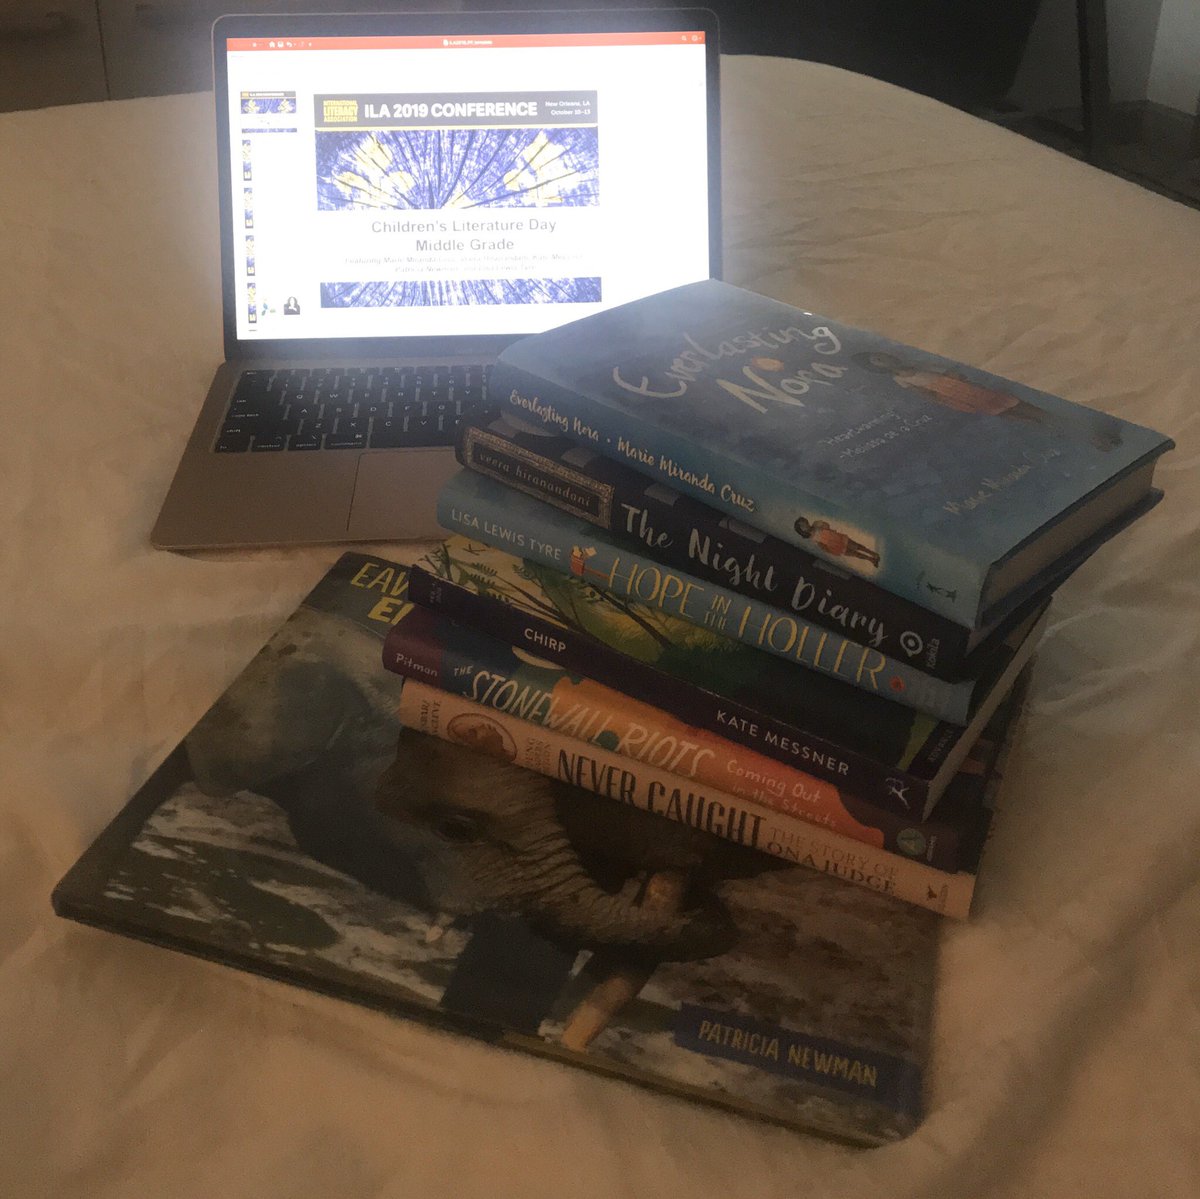 A little late night prep for #CLDmiddle #ILA19!!! Cannot wait to learn from our featured authors and to share their wonderful books! NOTHING better than the #middlegrades! @GaylePitman @ericaadunbar @KateMessner @LisaLewisTyre @cruzwrites @PatriciaNewman @VeeraHira